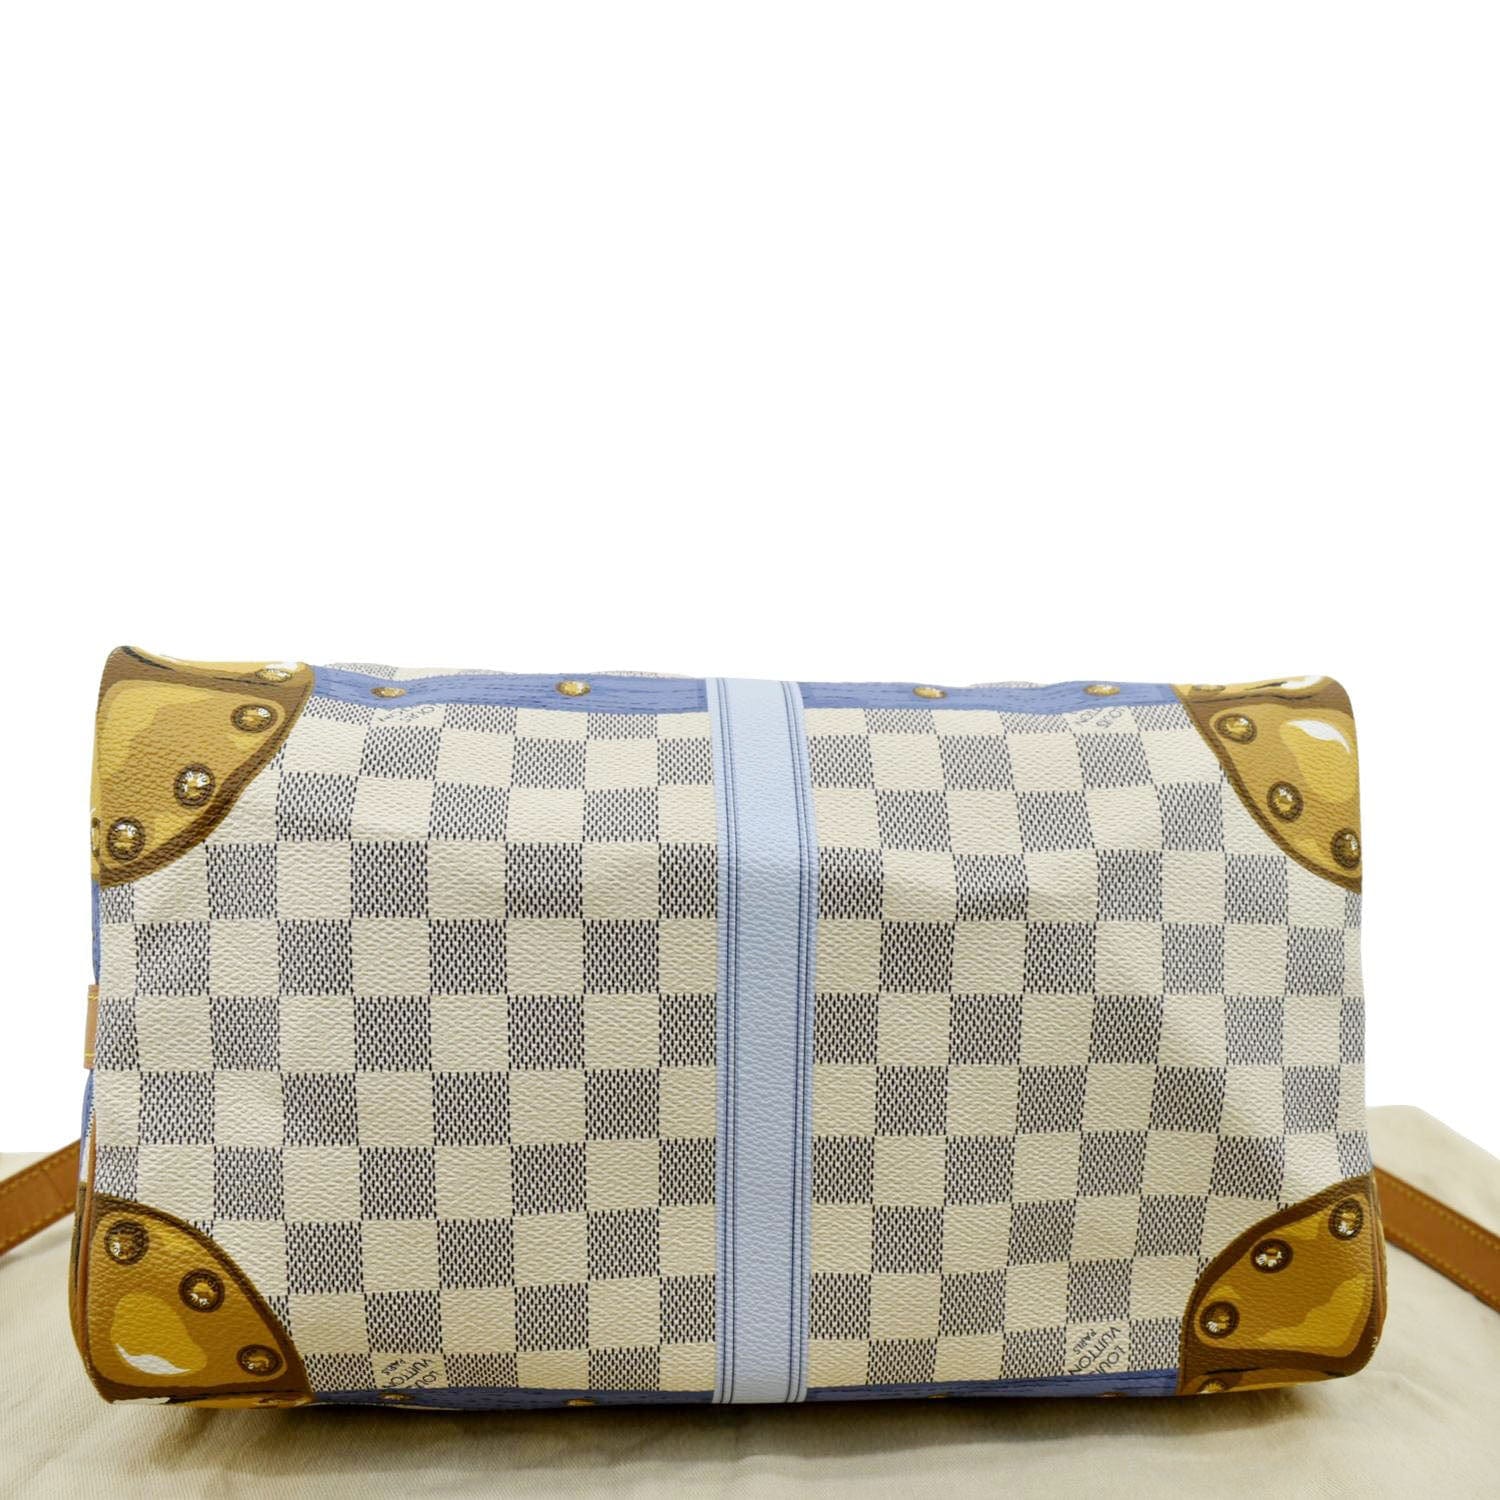 Louis Vuitton Speedy 30 Bandouliere Damier Azur Canvas Summer Trunks 2018  Limited Edition Preowned